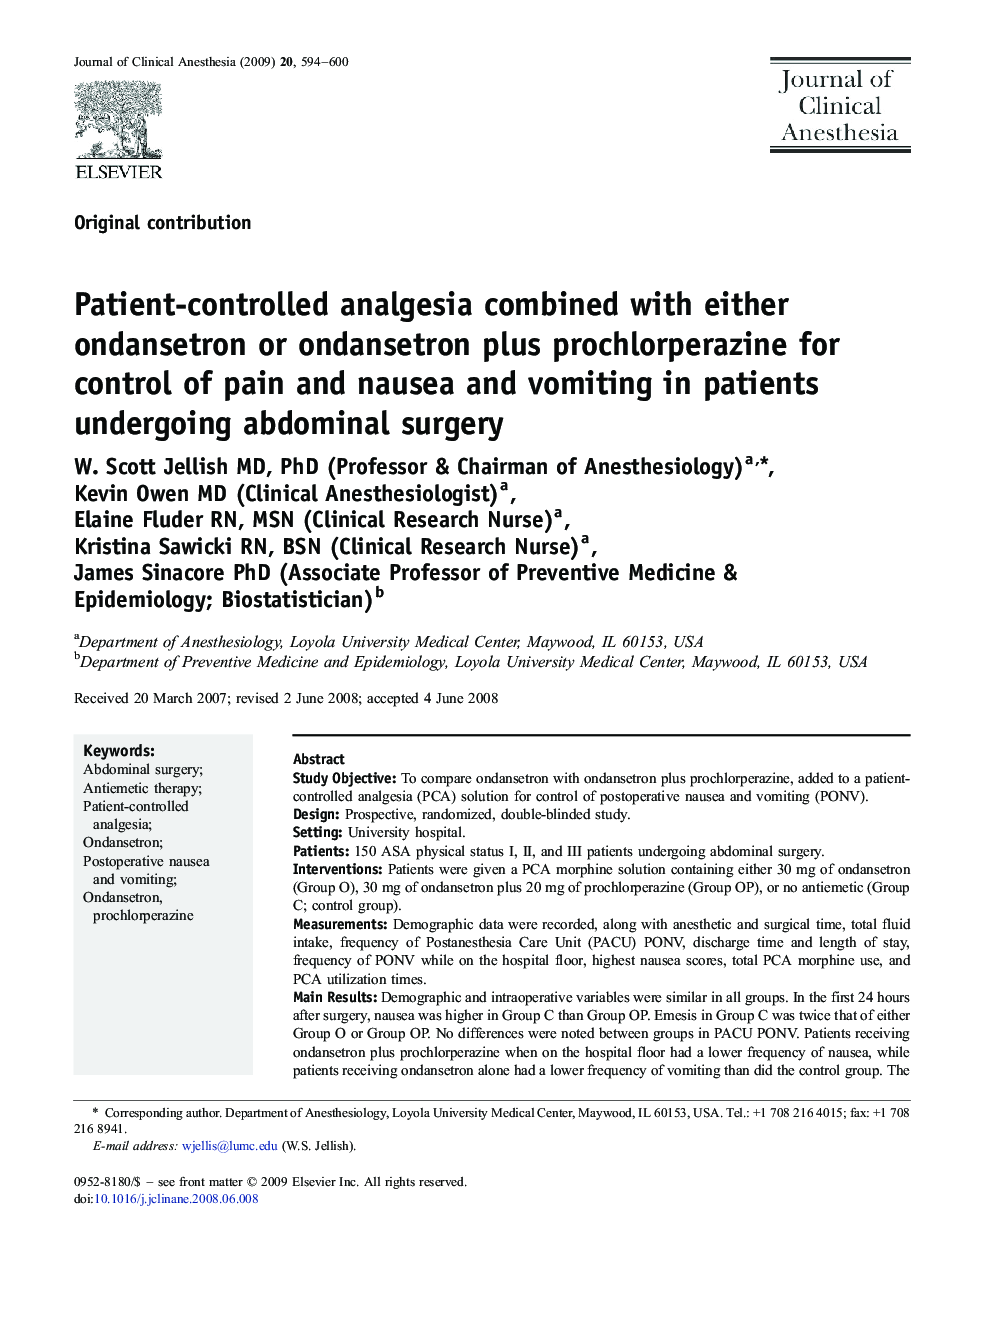 Patient-controlled analgesia combined with either ondansetron or ondansetron plus prochlorperazine for control of pain and nausea and vomiting in patients undergoing abdominal surgery